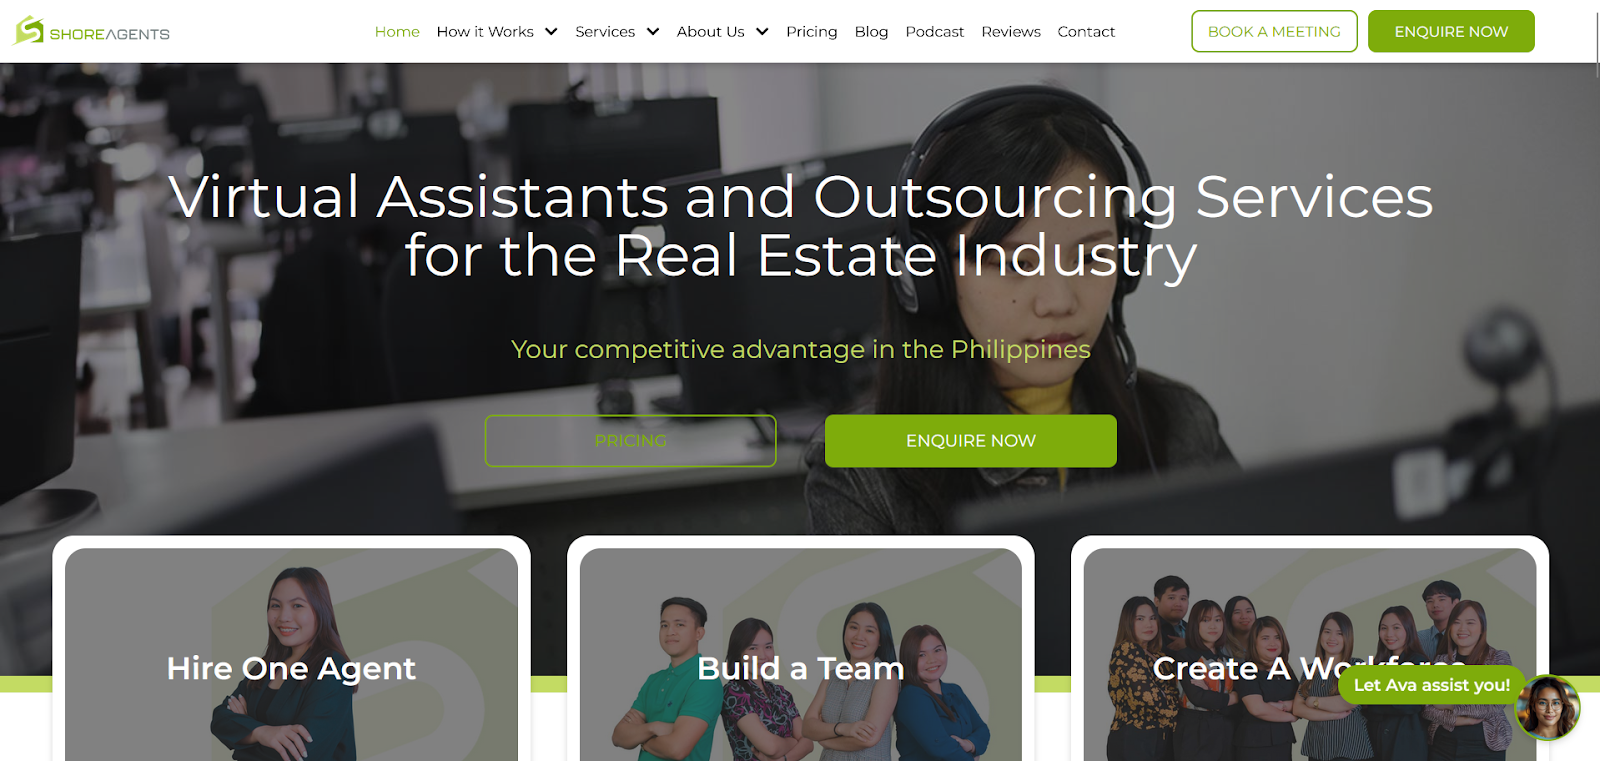 ShoreAgents - Top 10 Call Centers in the Philippines